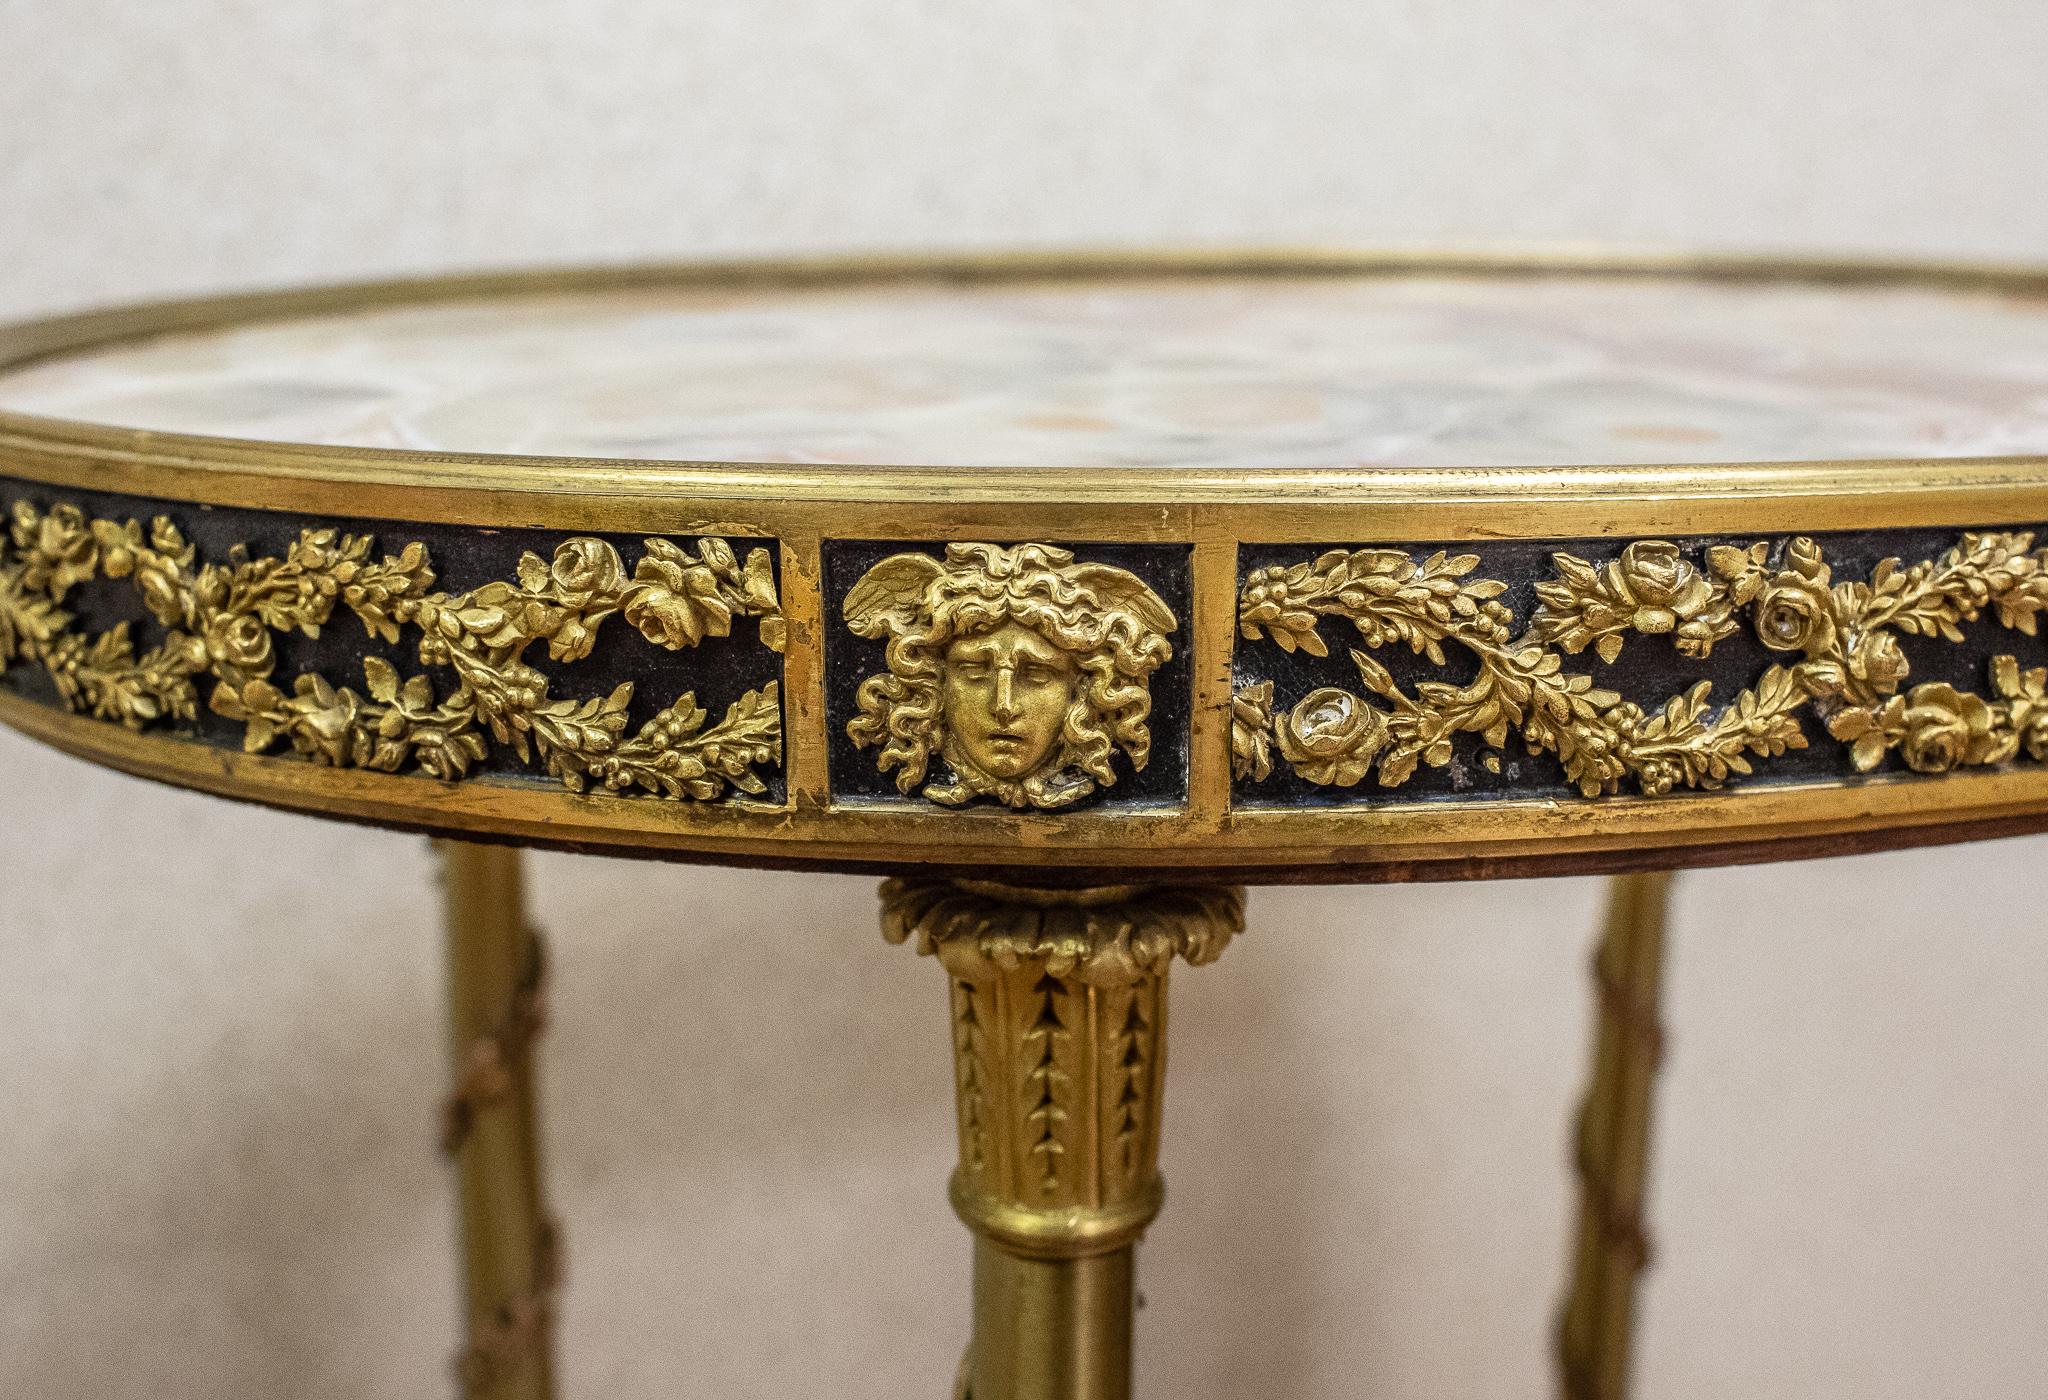 A very fine quality 19th century French Louis XVI style bronze doré marble top oval shape side table.
The bronze work on this table is of the finest quality almost like jewelry and the marble top is a very unusual onyx.